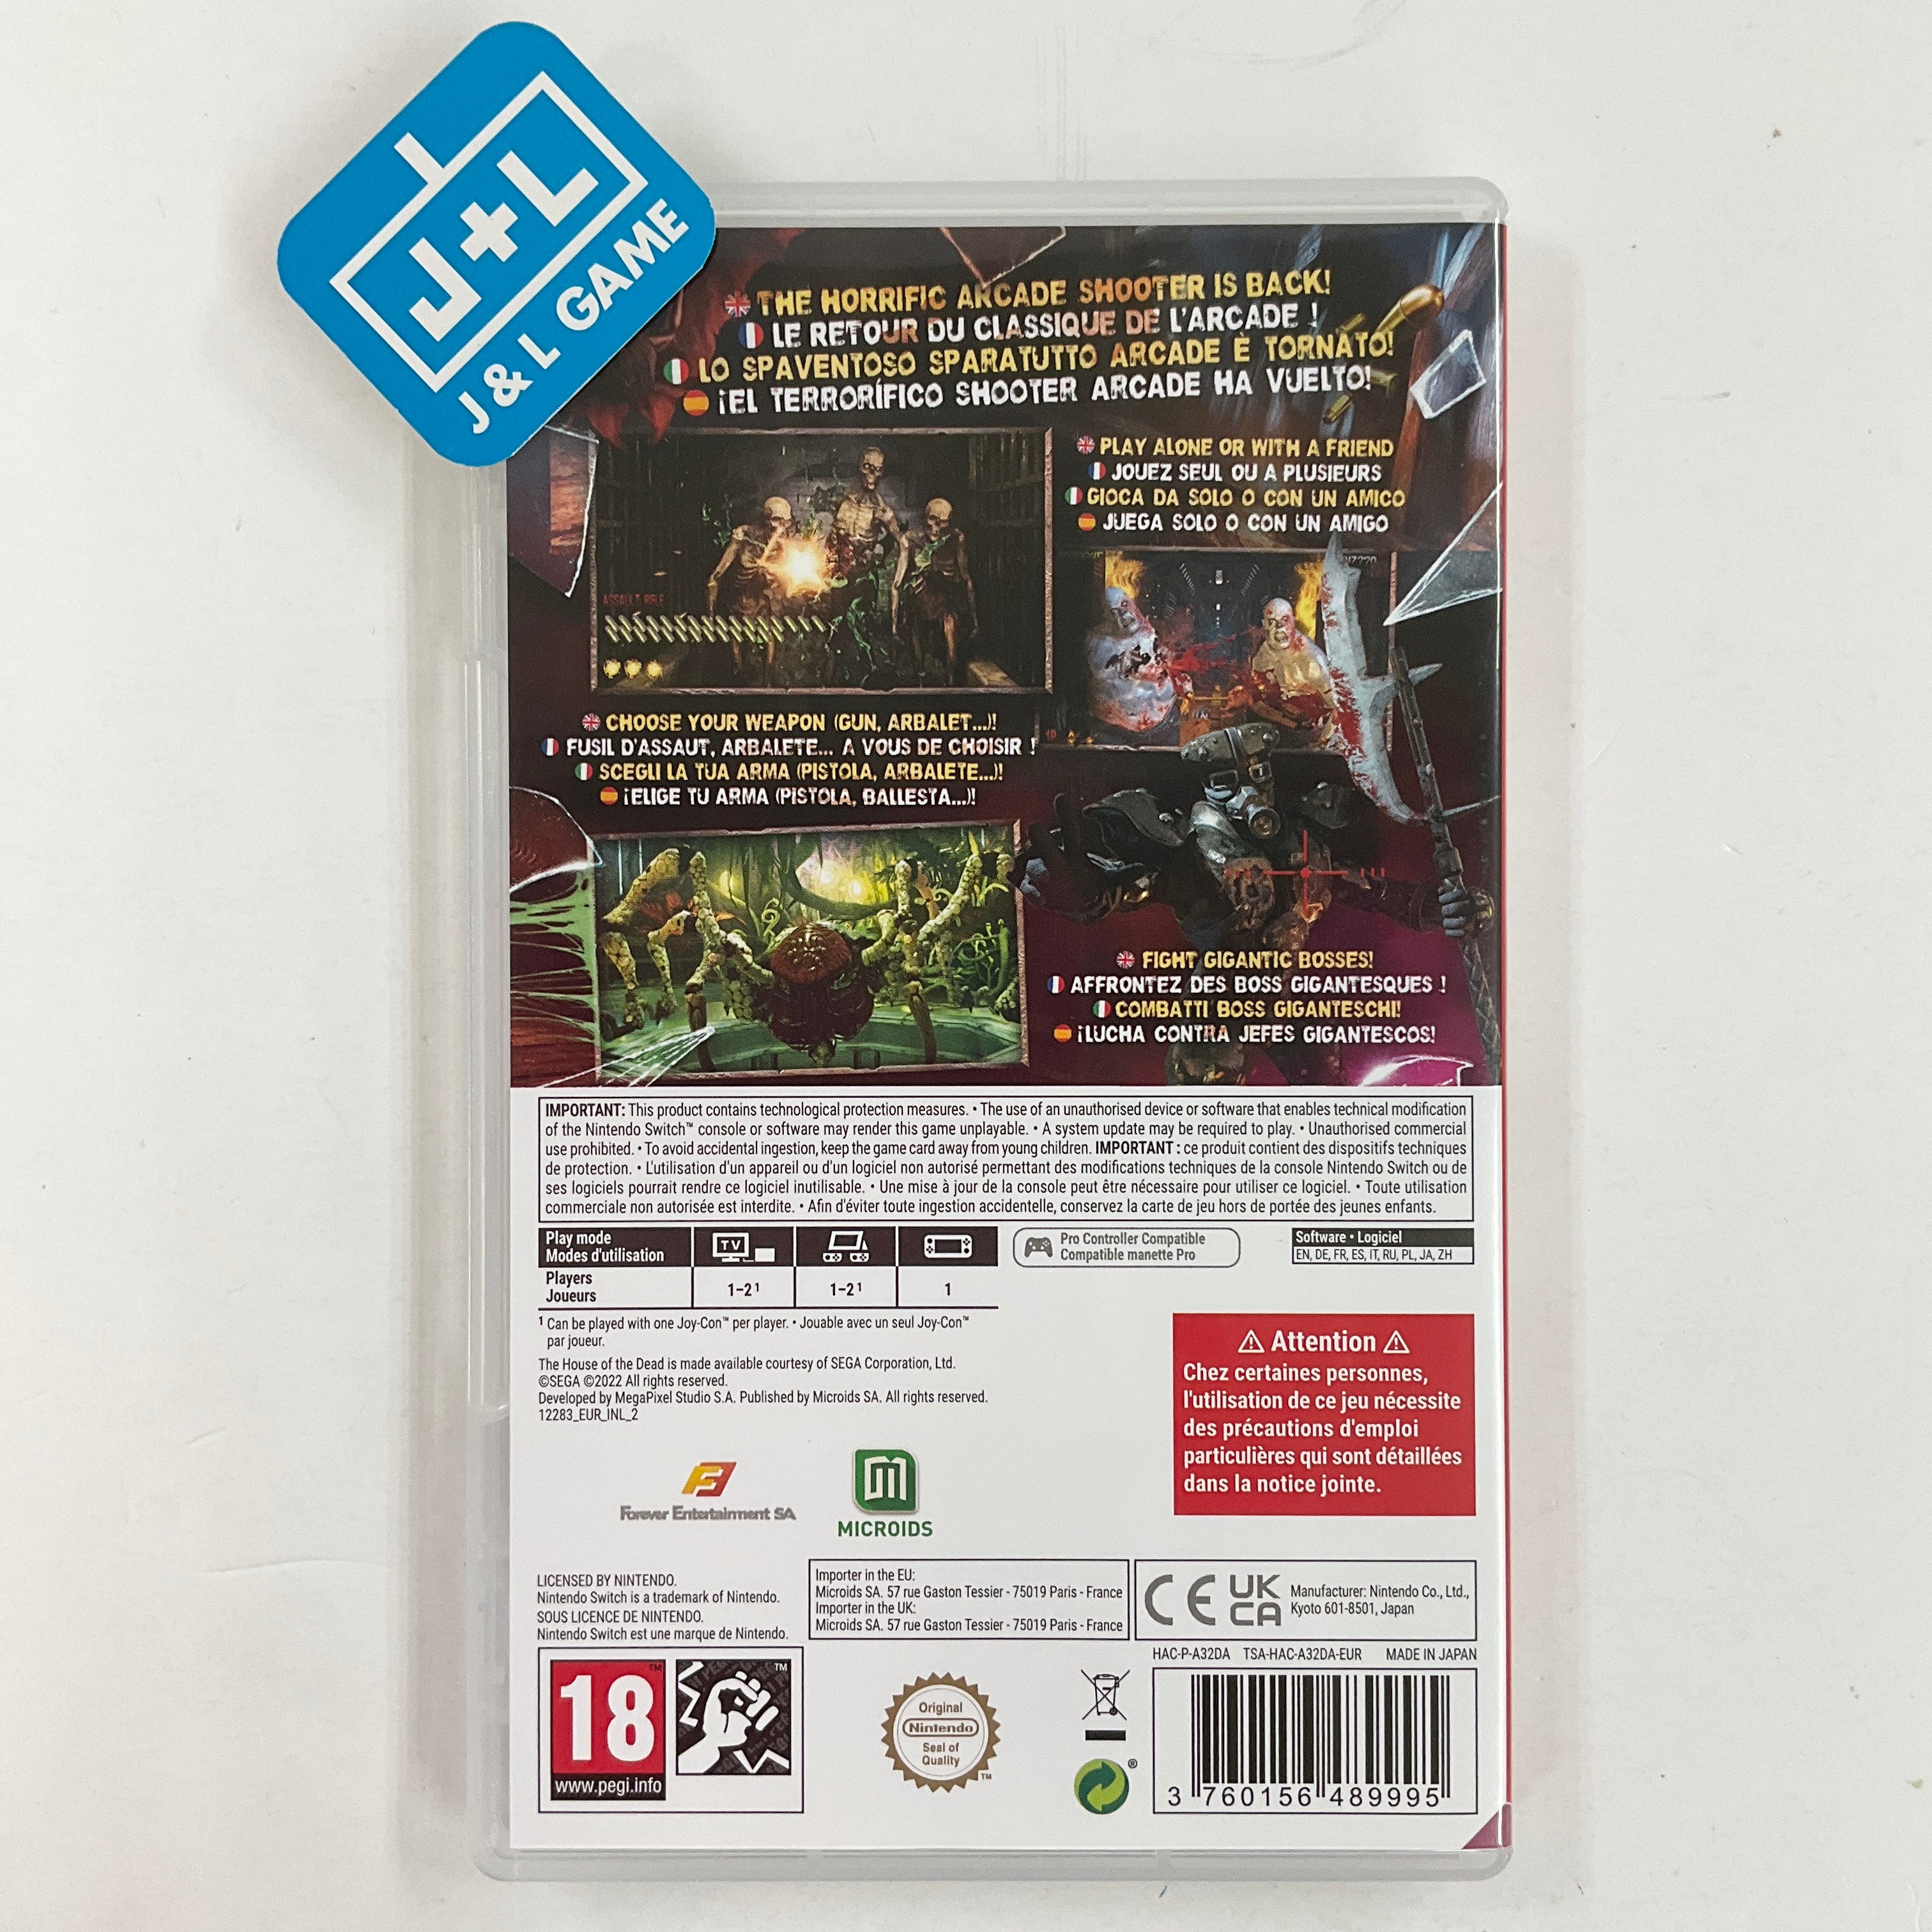 The House of the Dead: Remake (Limidead Edition) - (NSW) Nintendo Switch (European Import) [UNBOXING] Video Games Microids   